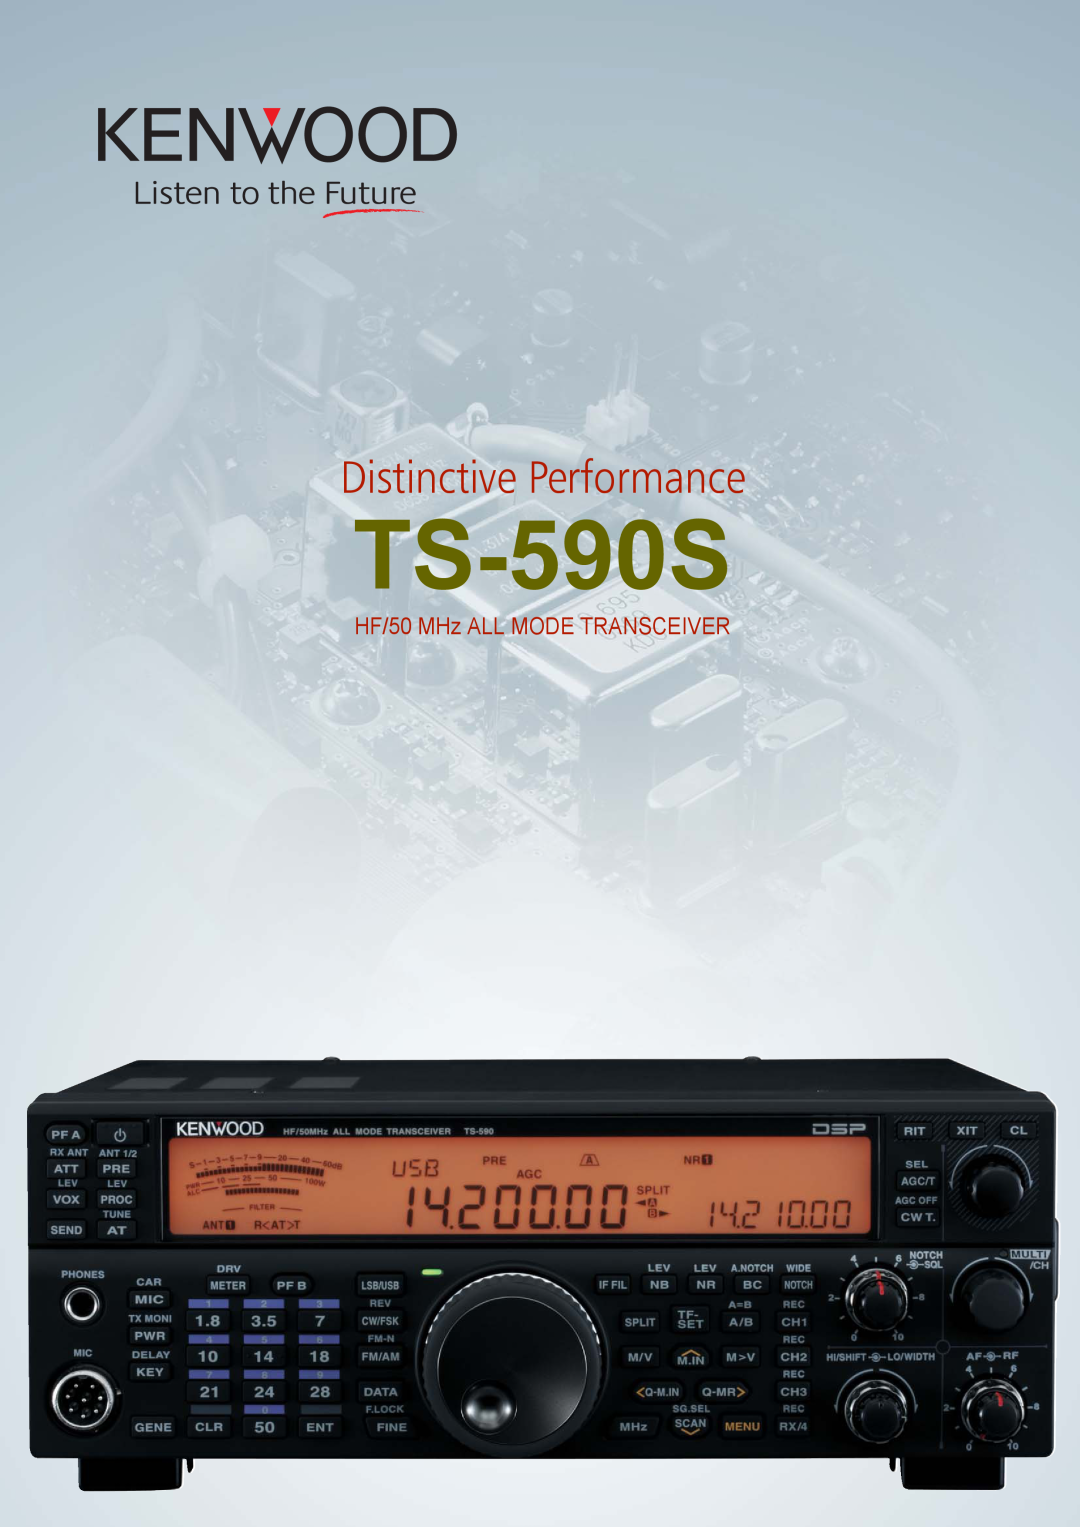 Kenwood TS-590S manual Distinctive Performance, HF/50 MHz ALL MODE TRANSCEIVER 